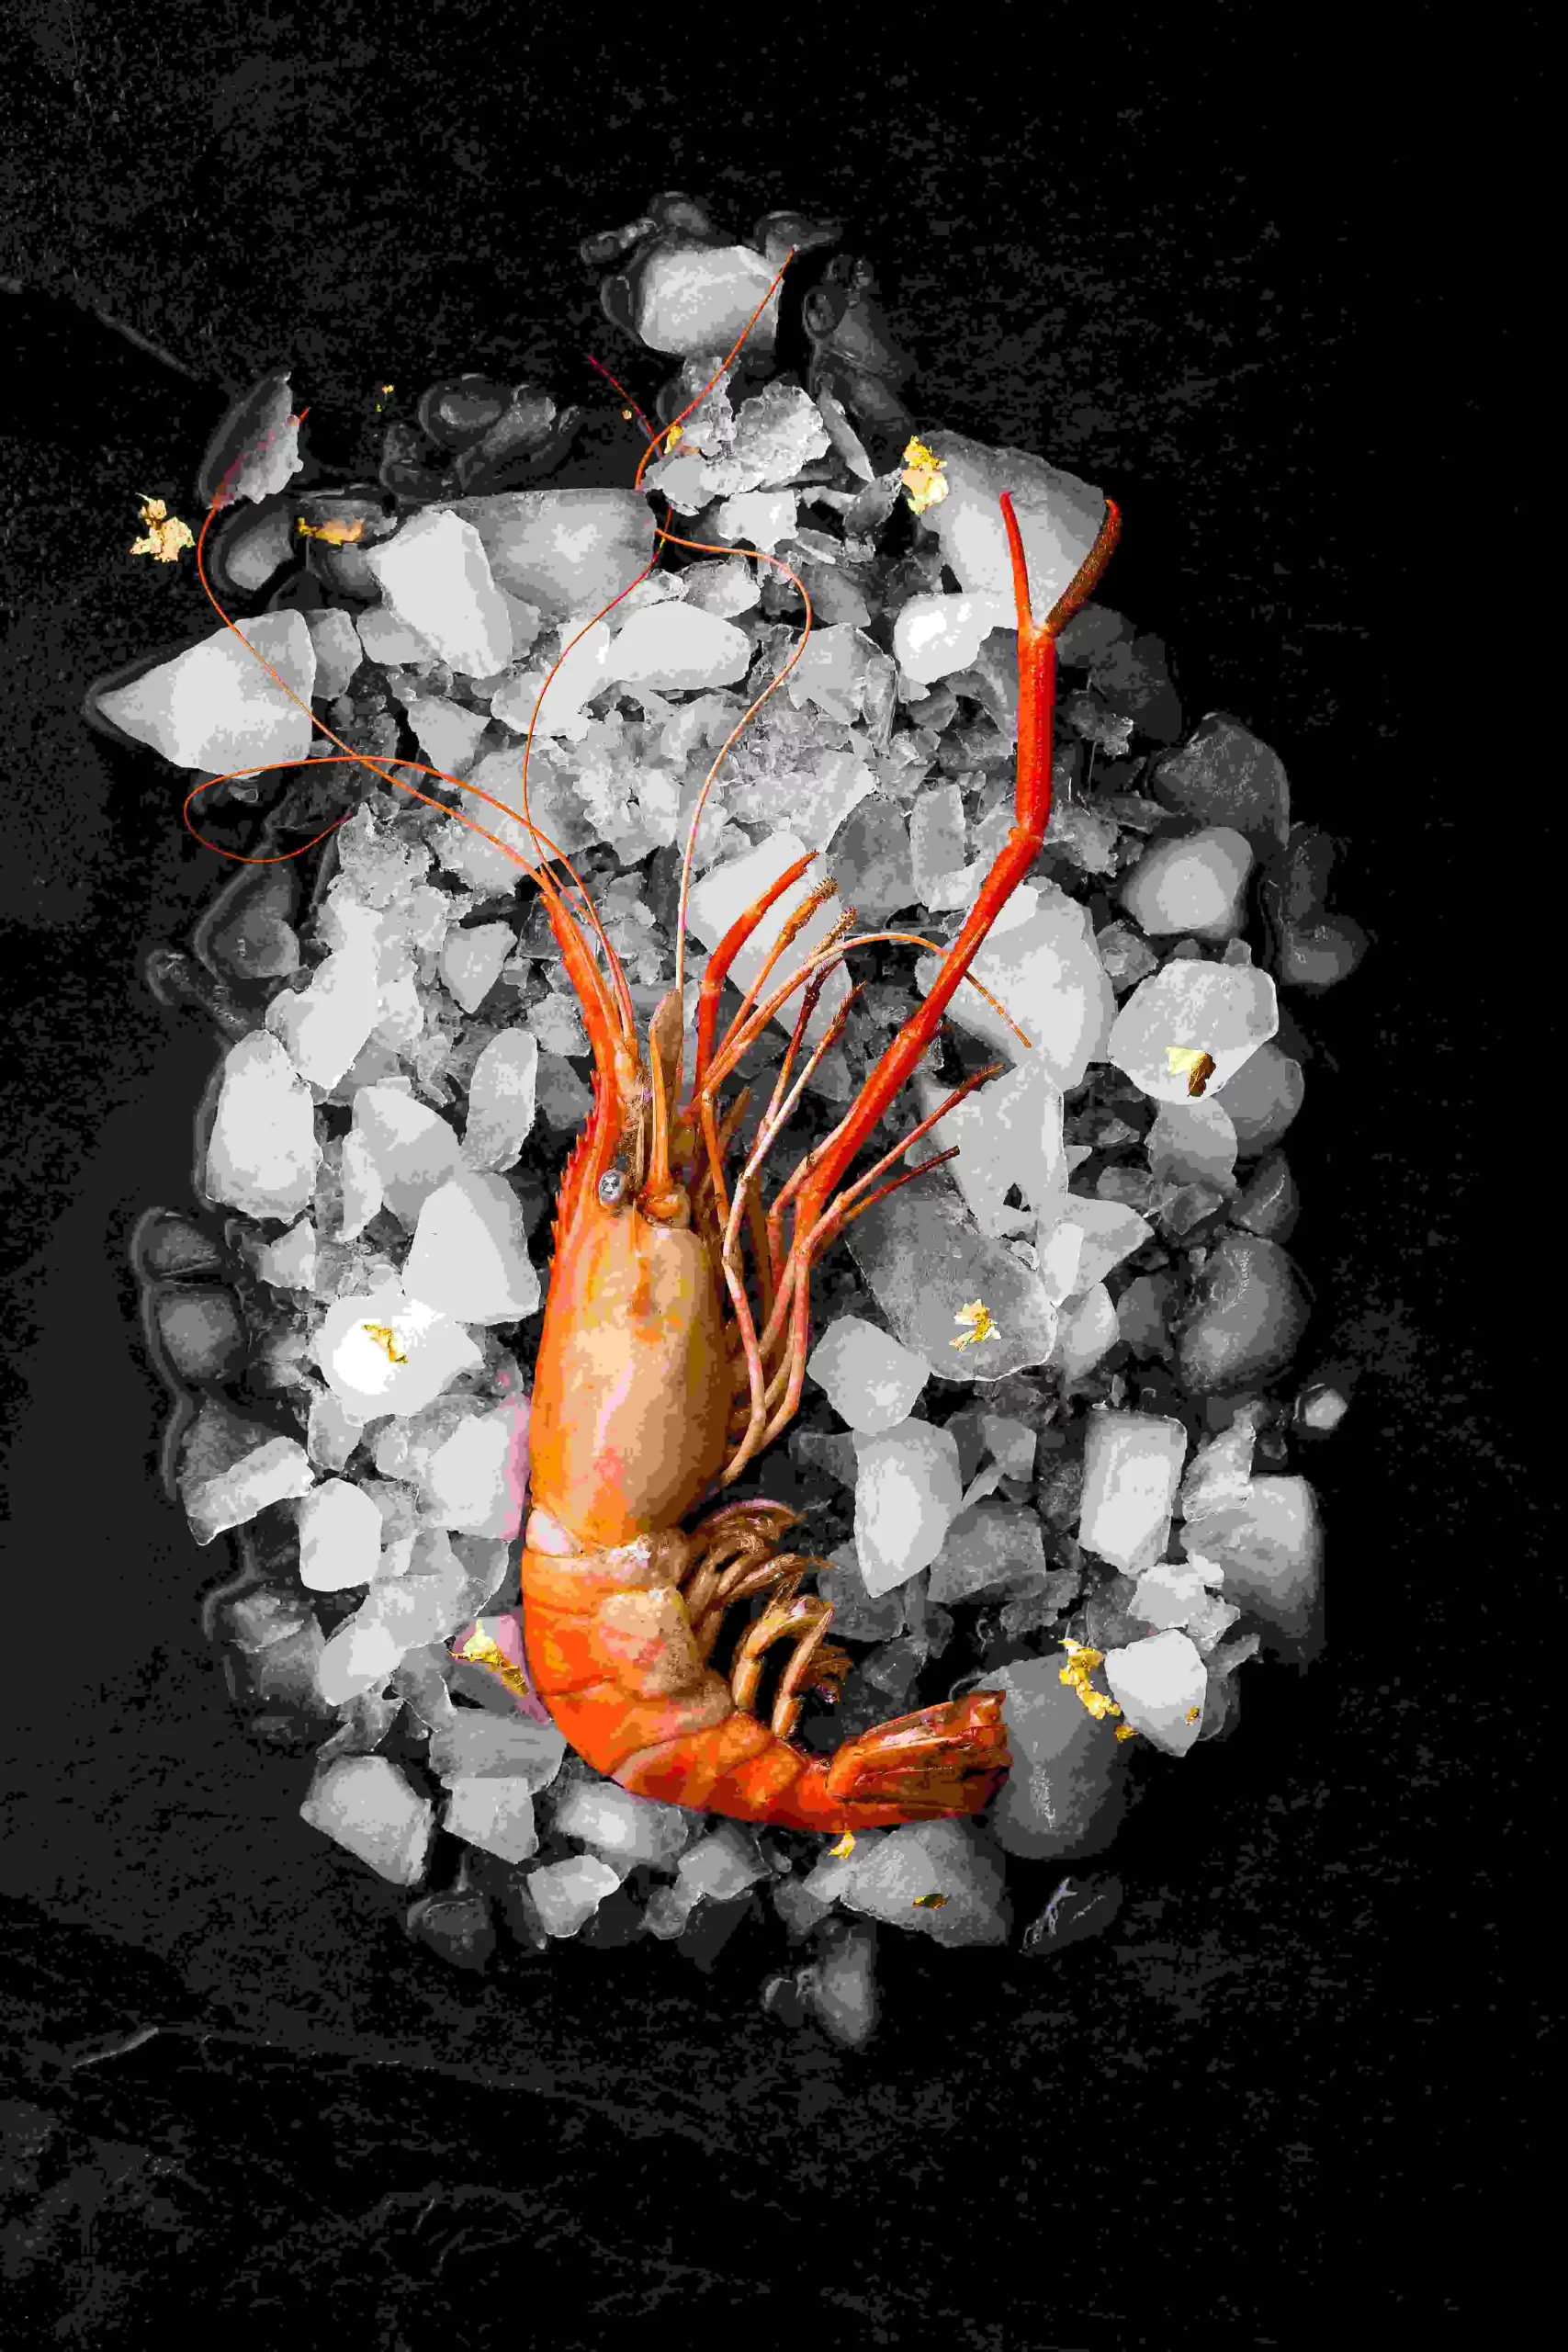 An image of a shrimp on a black background.